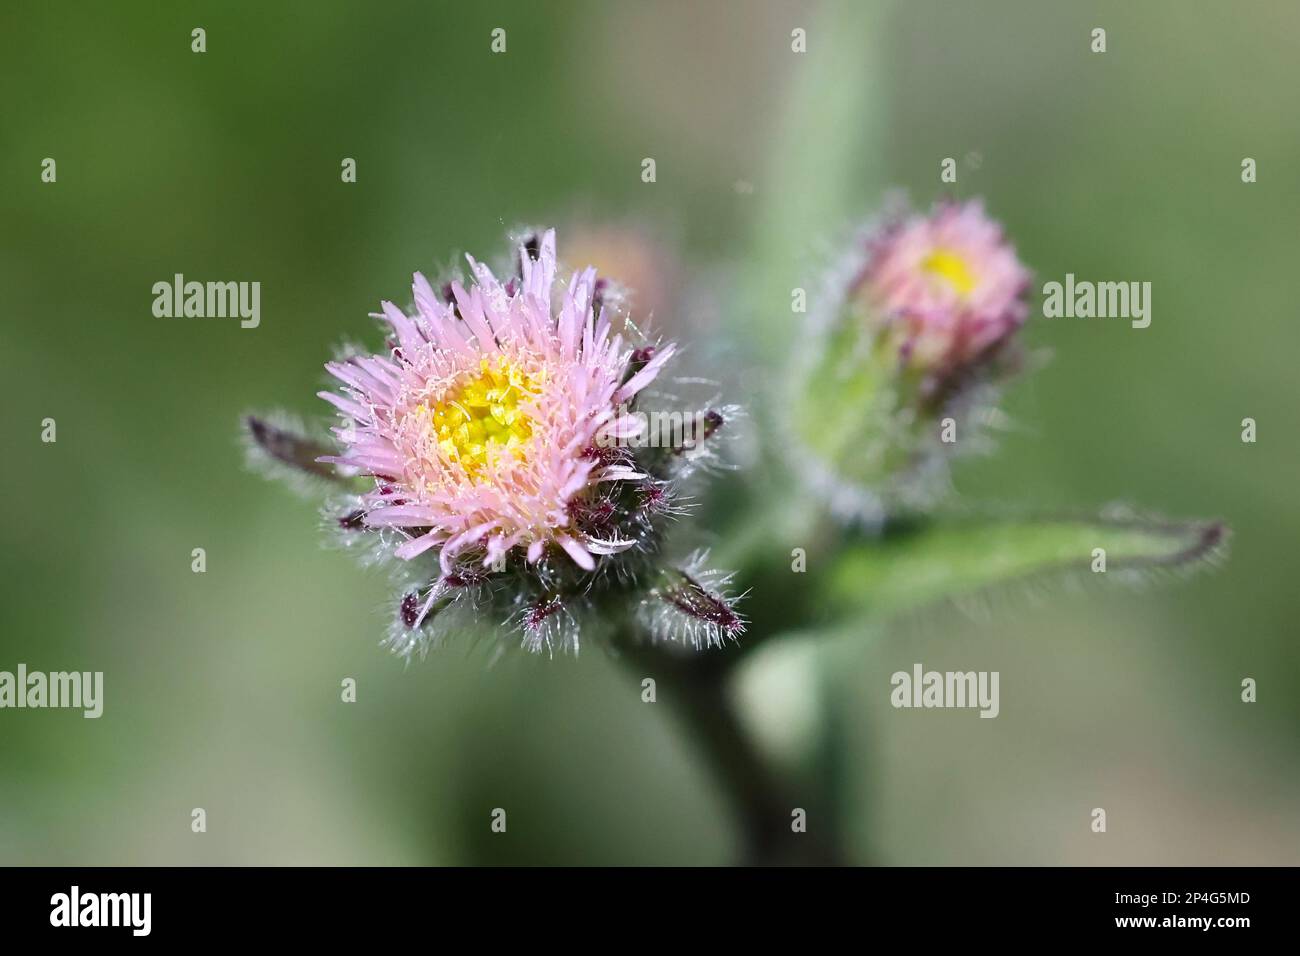 Erigeron acris, also called Erigeron acer, commonly known as Blue Fleabane or Bitter fleabane, wild flowering plant from Finland Stock Photo